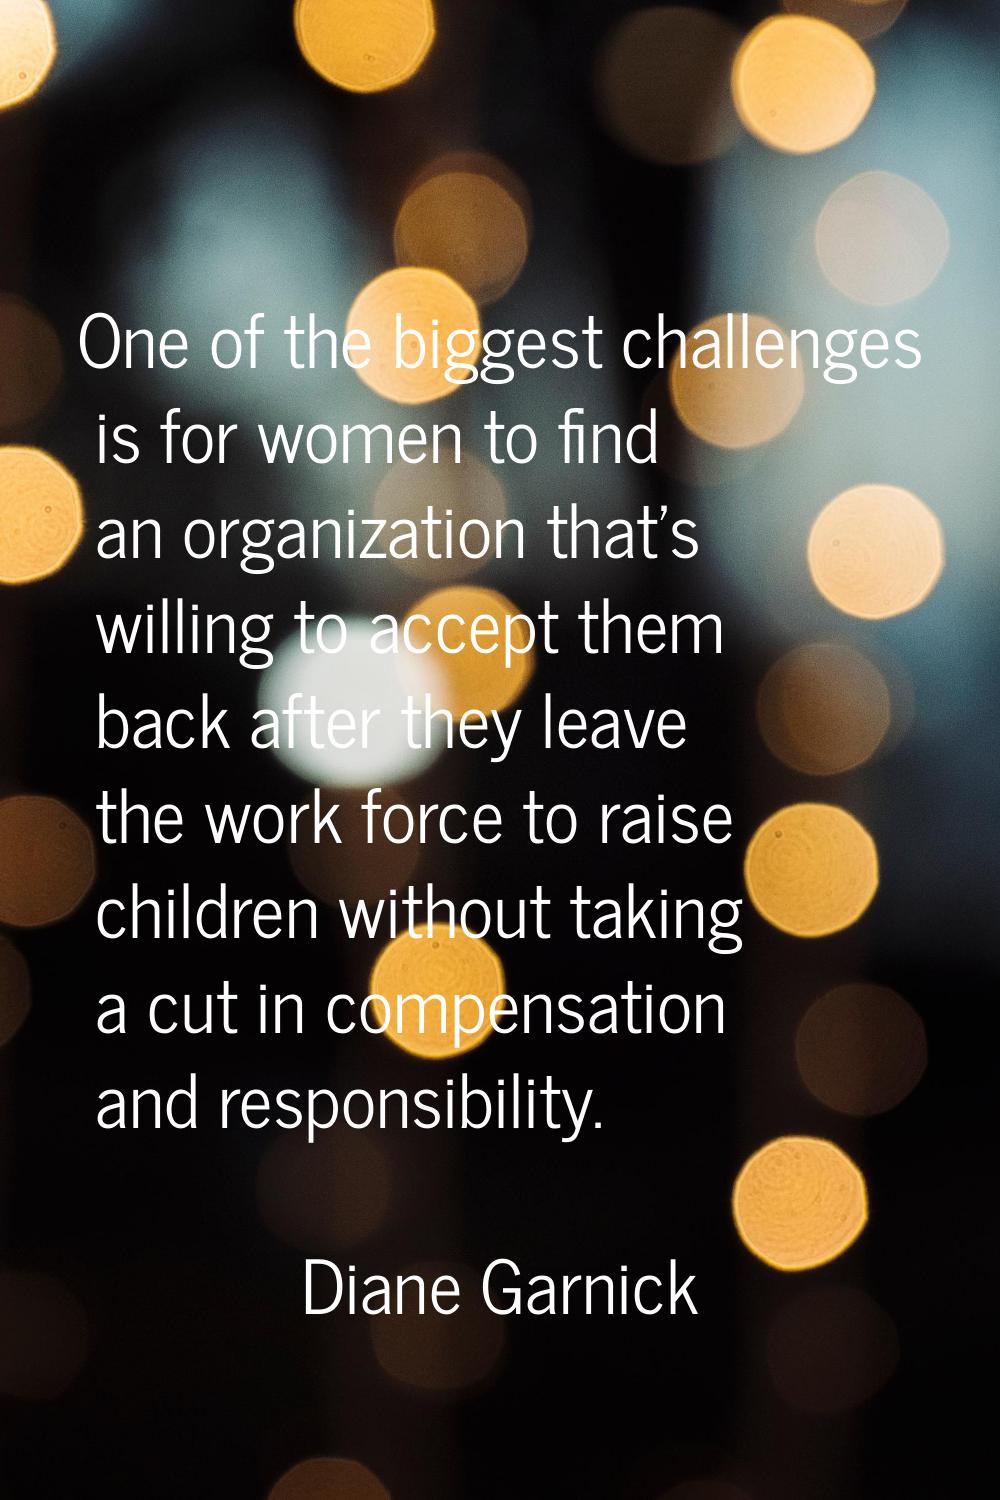 One of the biggest challenges is for women to find an organization that's willing to accept them ba